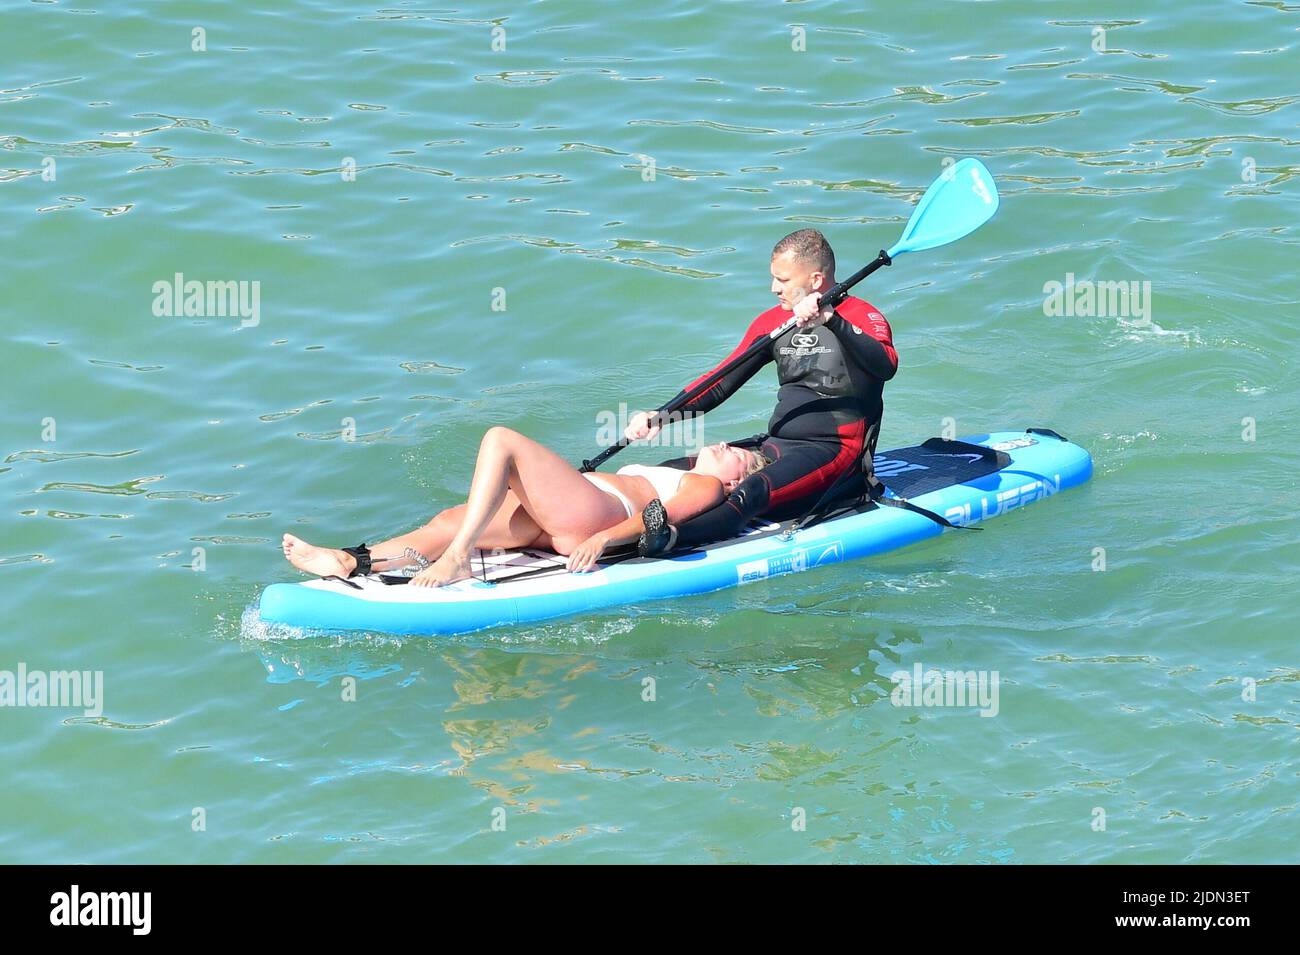 Bournemouth, Dorset, UK, 22nd June 2022, Weather. Hot afternoon in glorious summer sunshine. Woman in bikini lying on paddleboard while a man in a wetsuit paddles. Credit: Paul Biggins/Alamy Live News Stock Photo